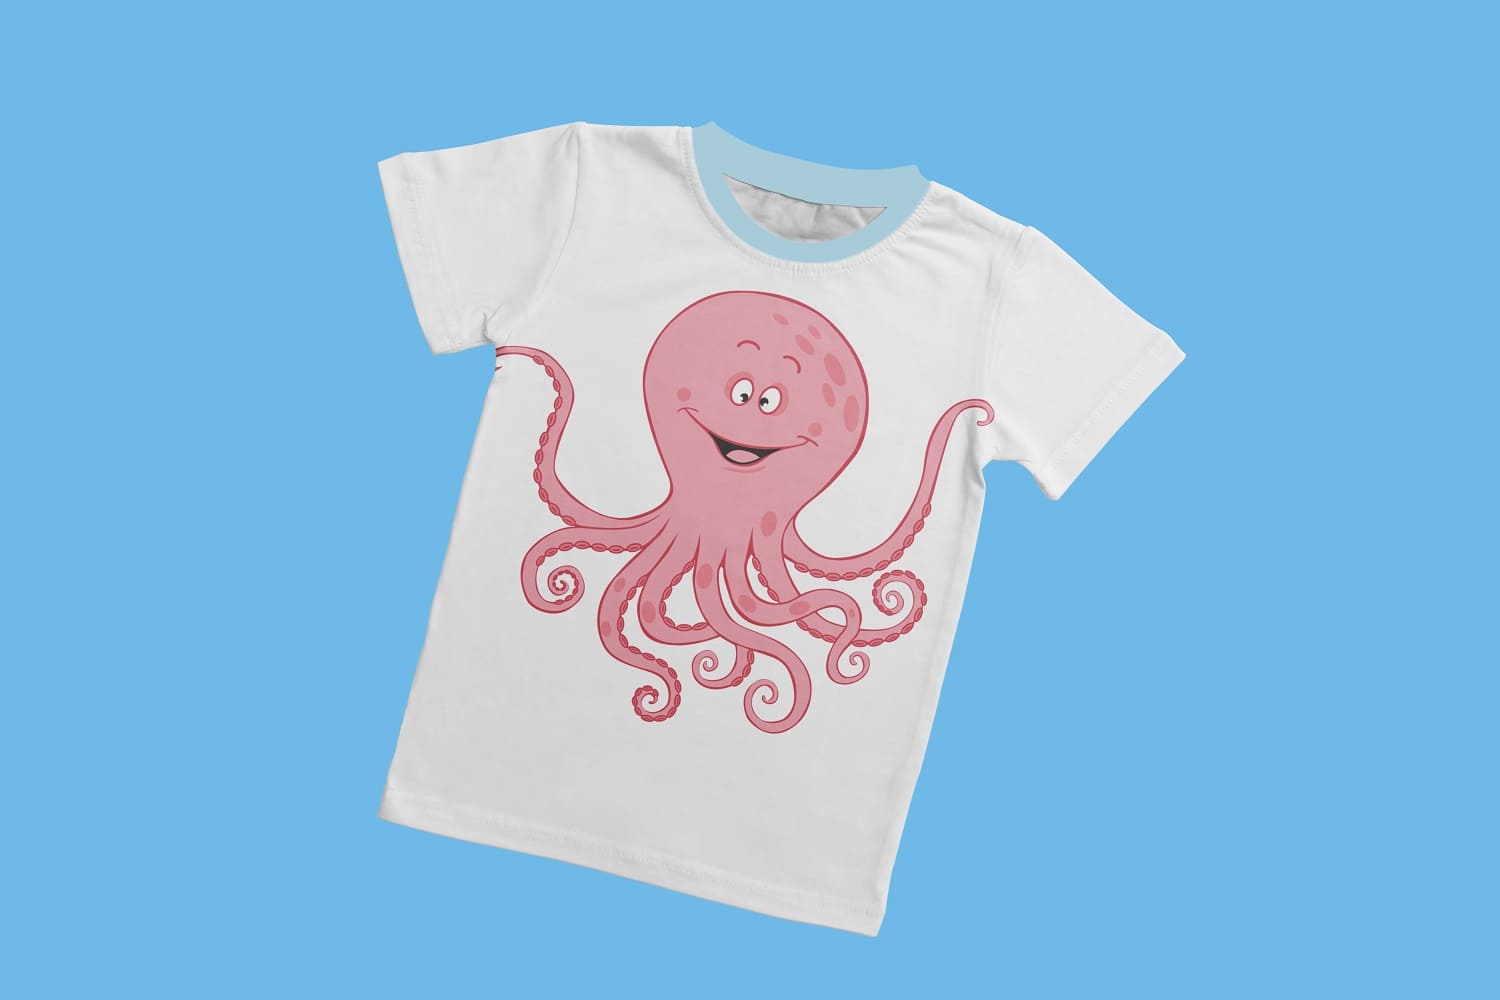 Funny octopus t-shirt design on a blue background.